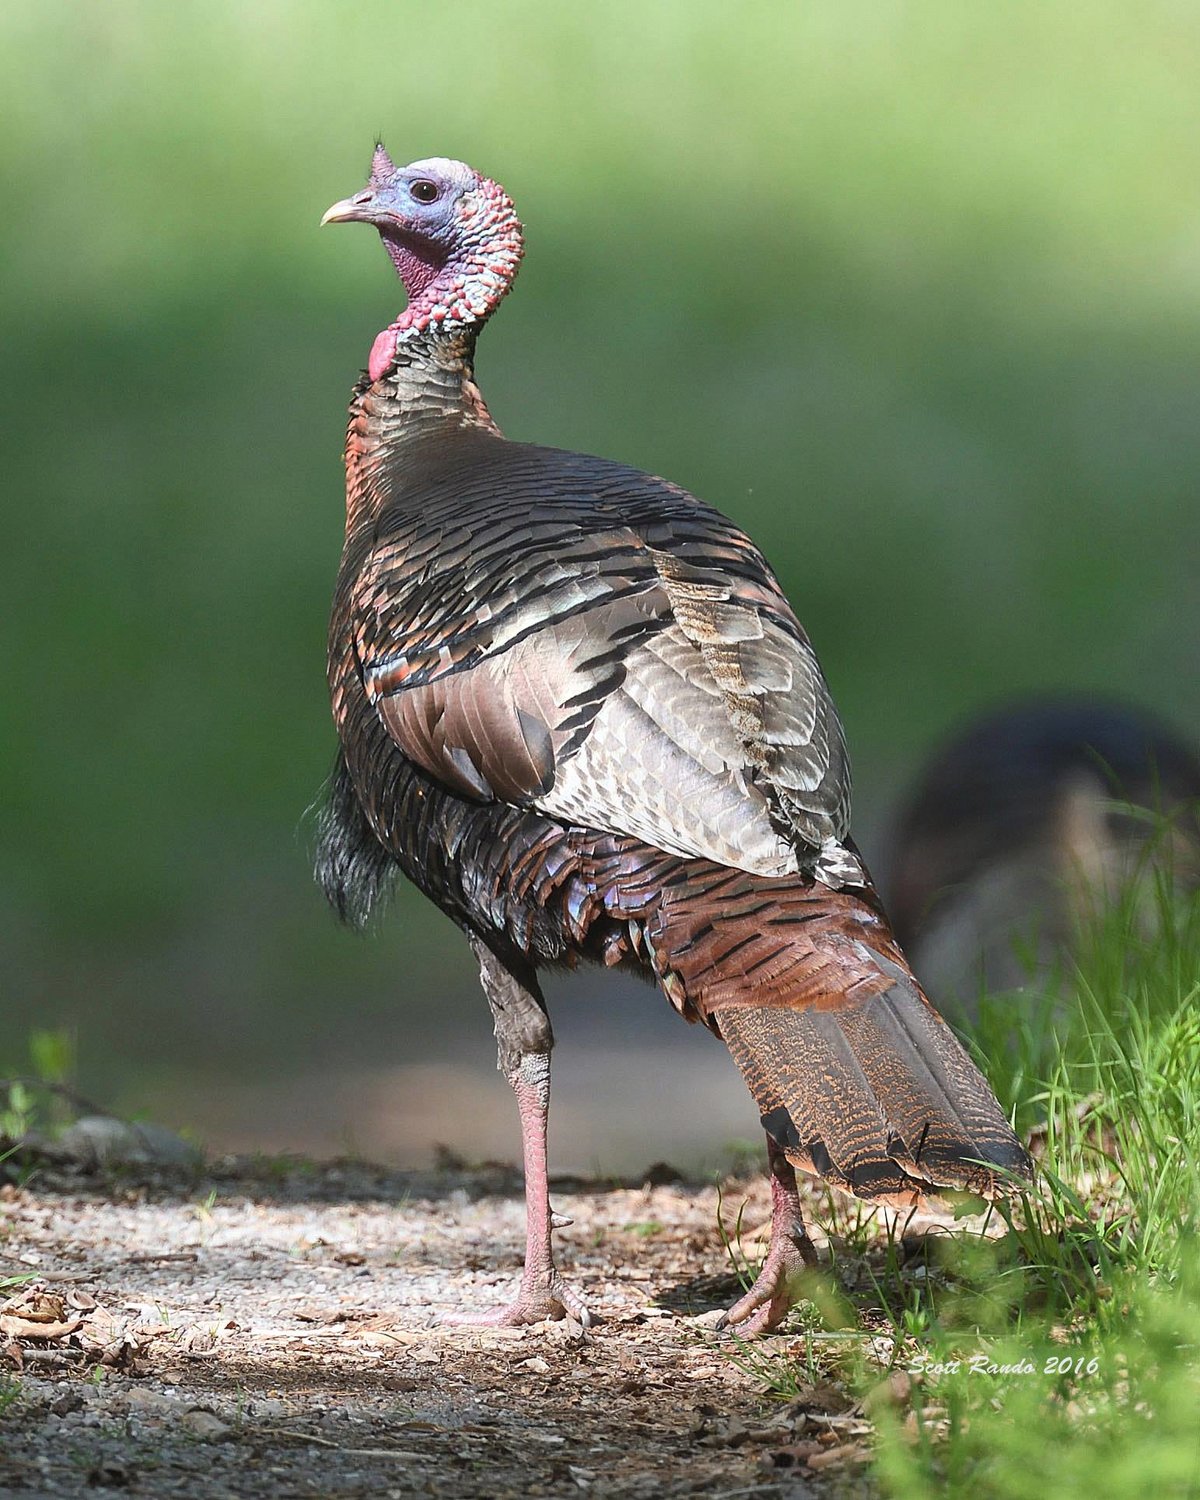 A male turkey, or “Tom,” is shown here. Like many species of birds, it is the more colorful sex of the species. The blue and red pigment on the head is more vivid, the breast and wing feathers show more iridescence, and longer “beard” feathers are present on the breast. You can see the beard of this male off the left side of the breast.